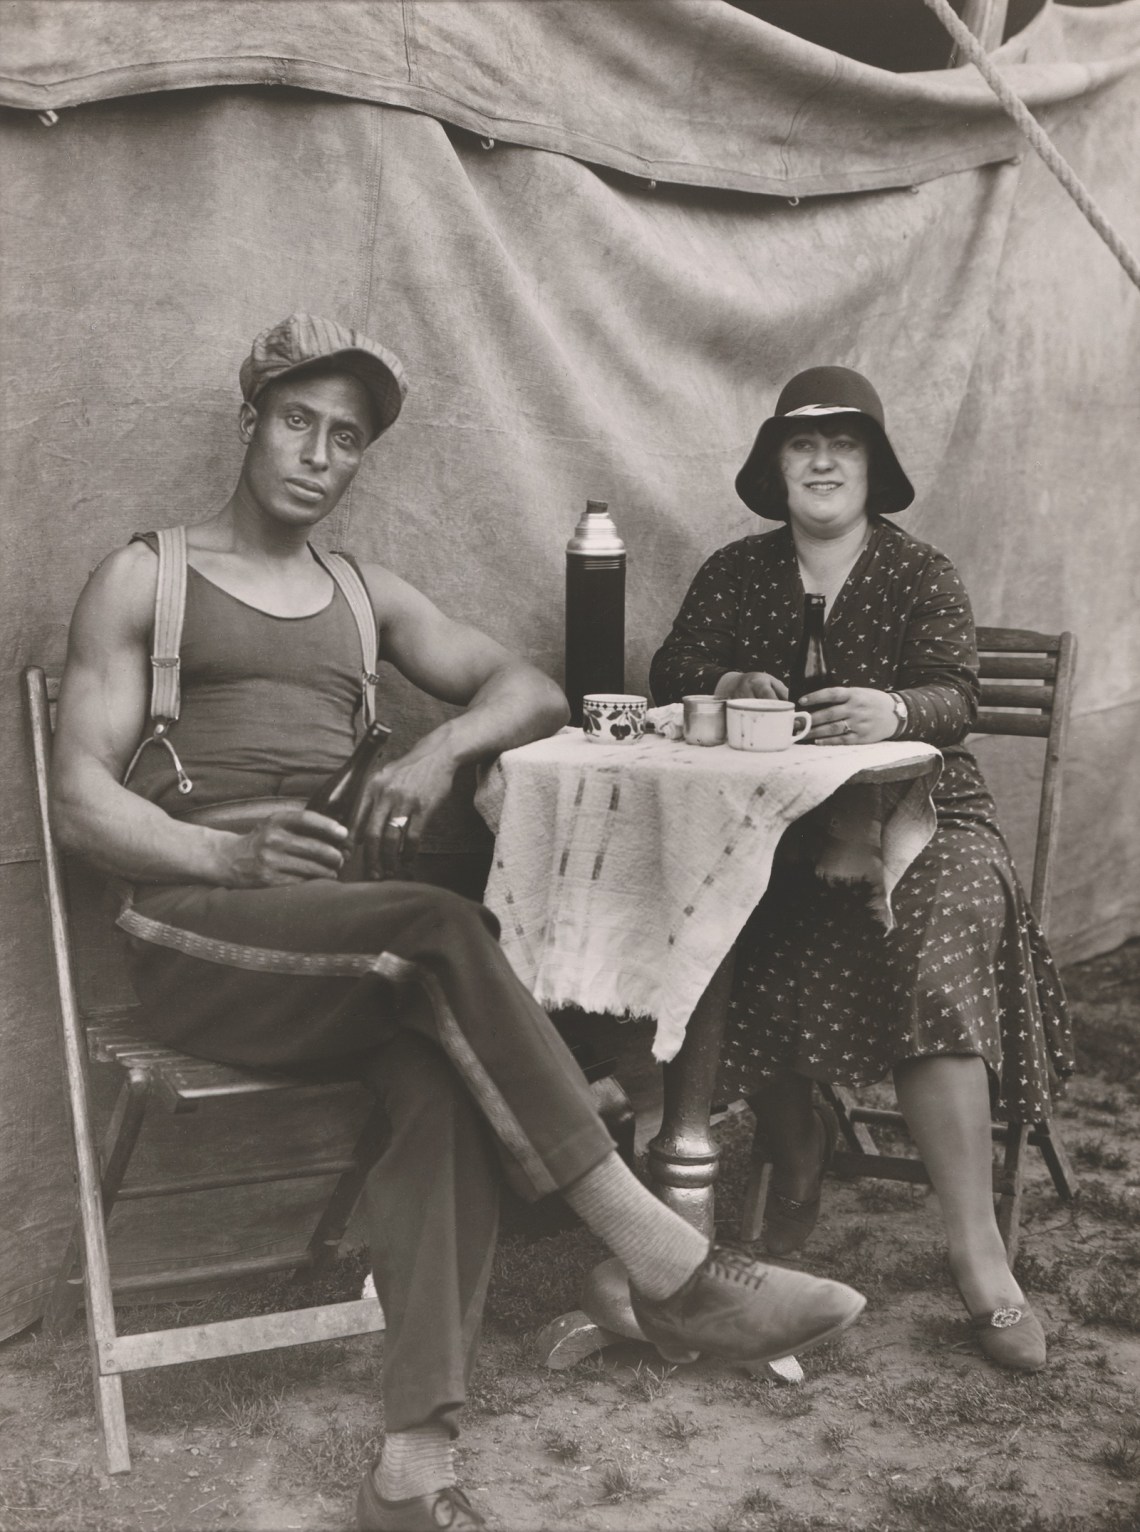 Two circus performers sit at a table in front of a tent, drinking out of a thermos